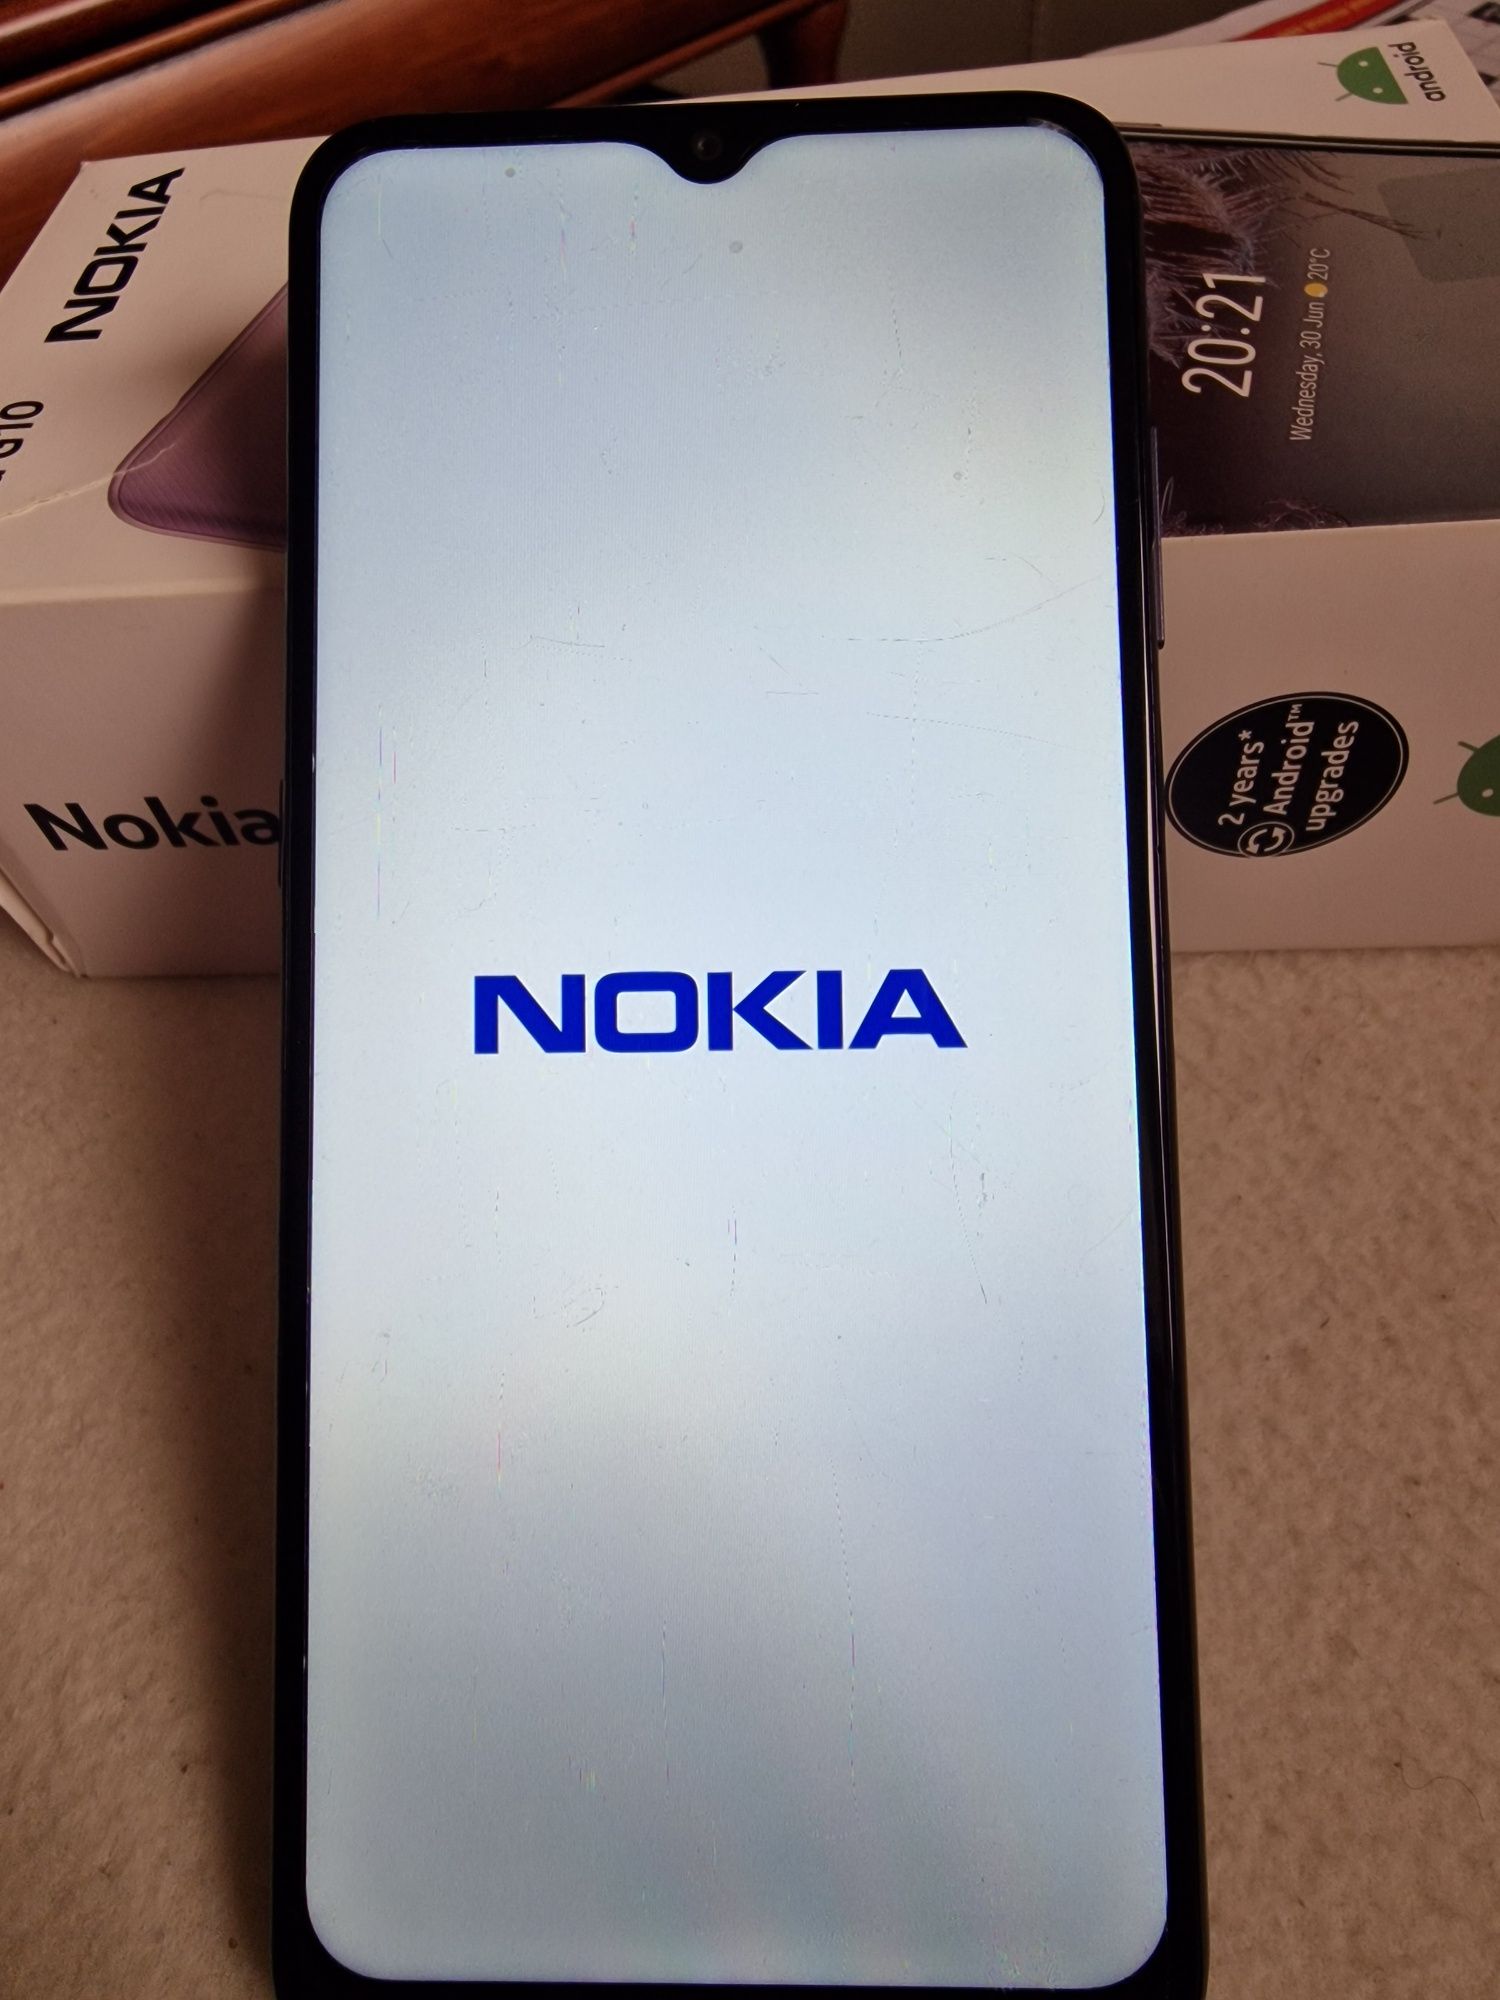 Nokia G10 android